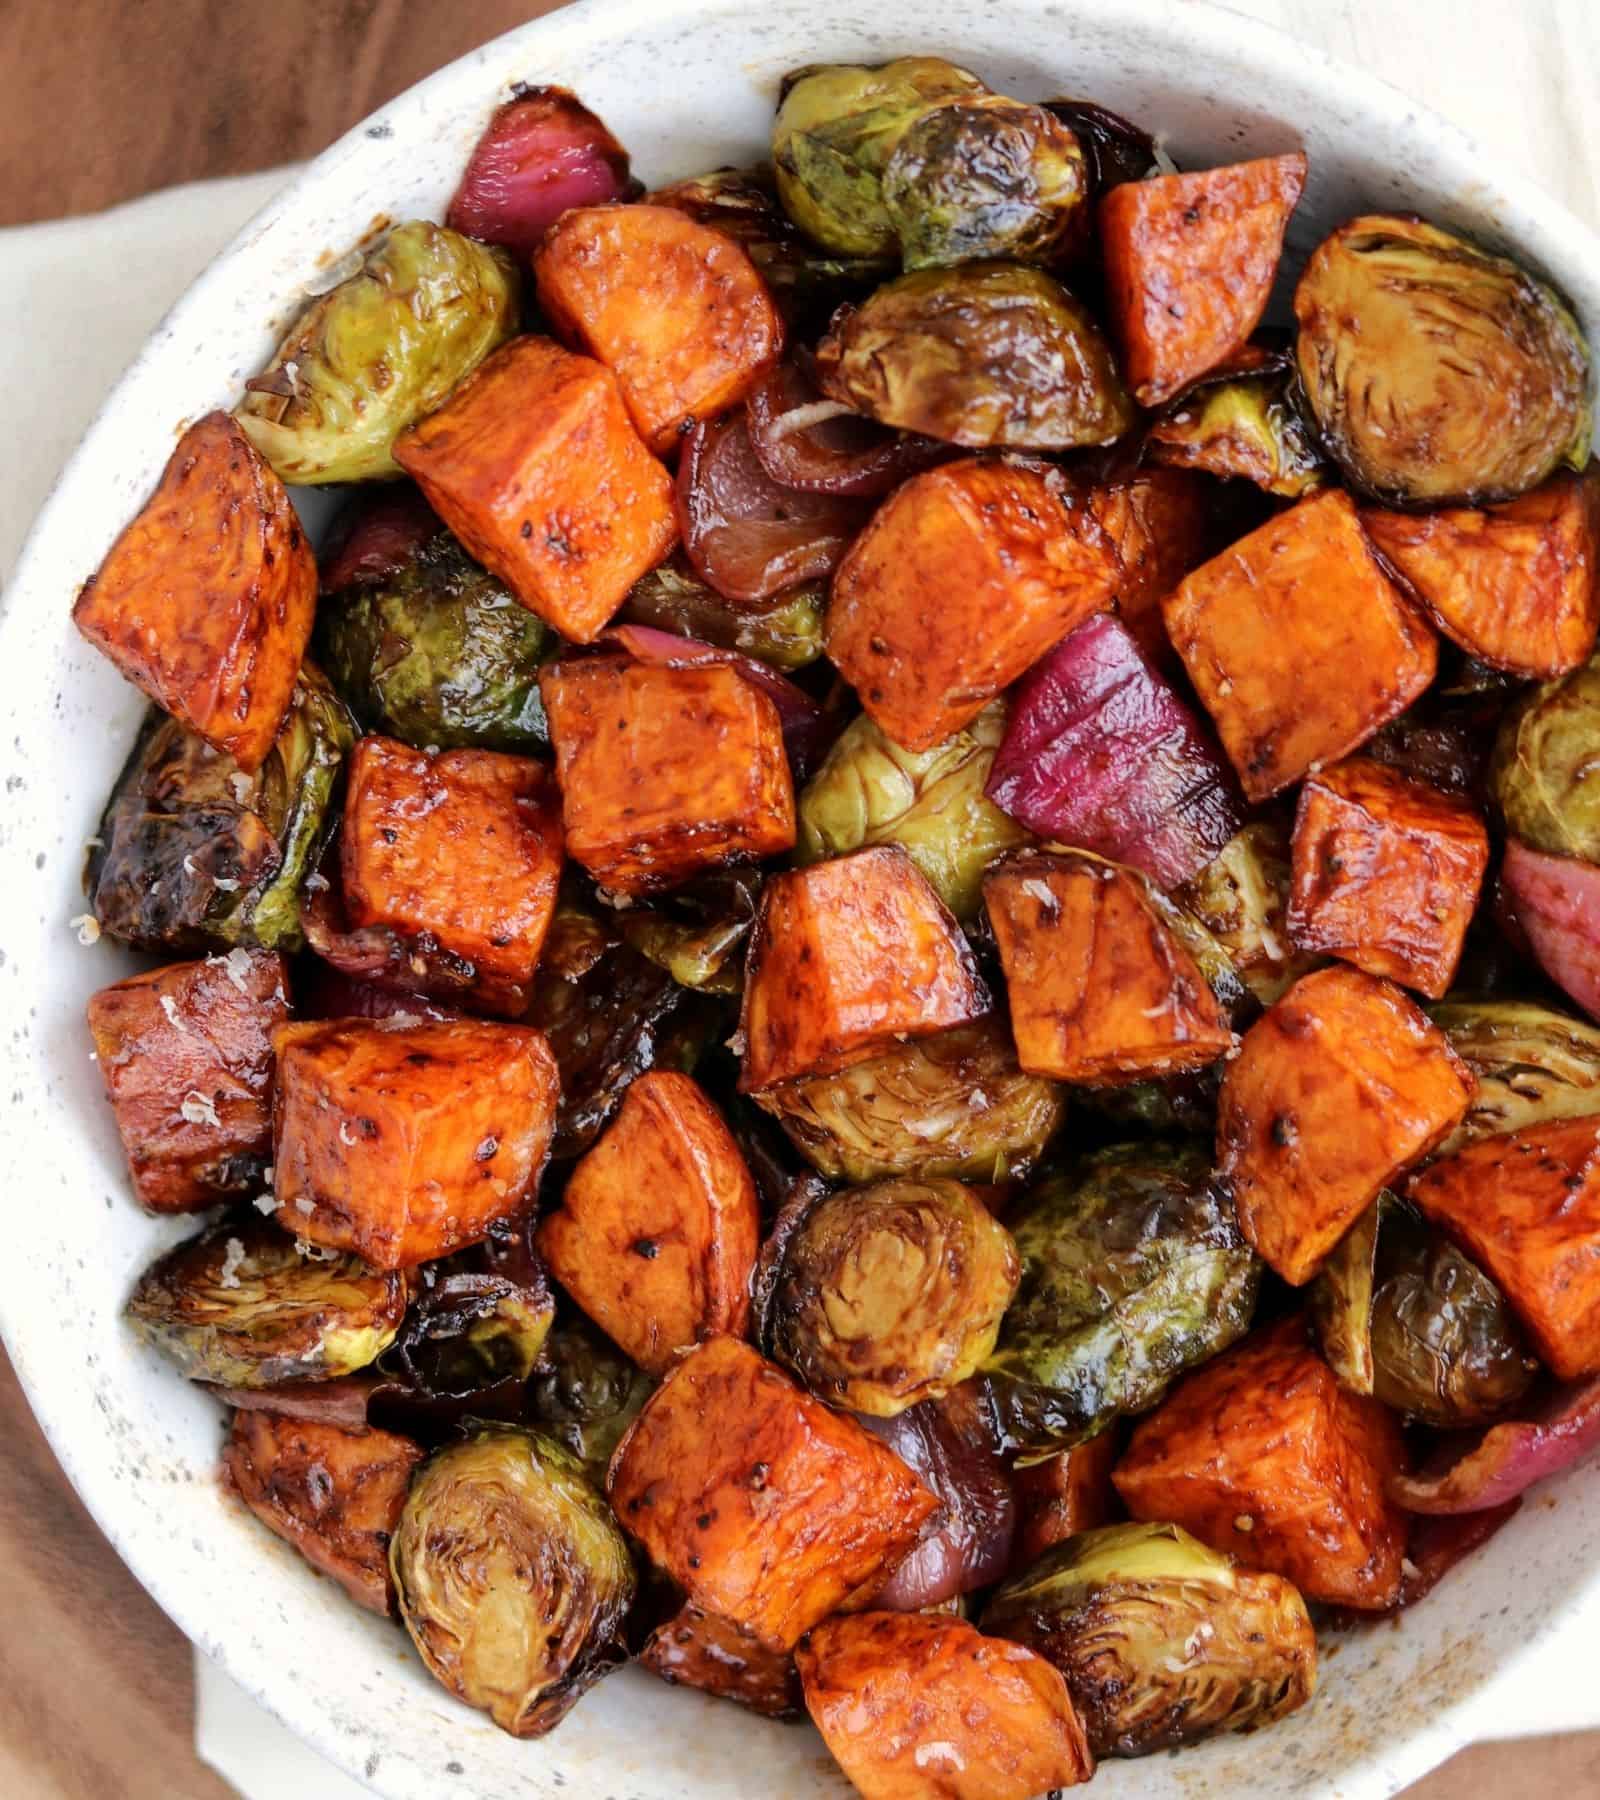 Honey Mustard Pan Roasted Brussels Sprouts from Frozen in 10 Mintues